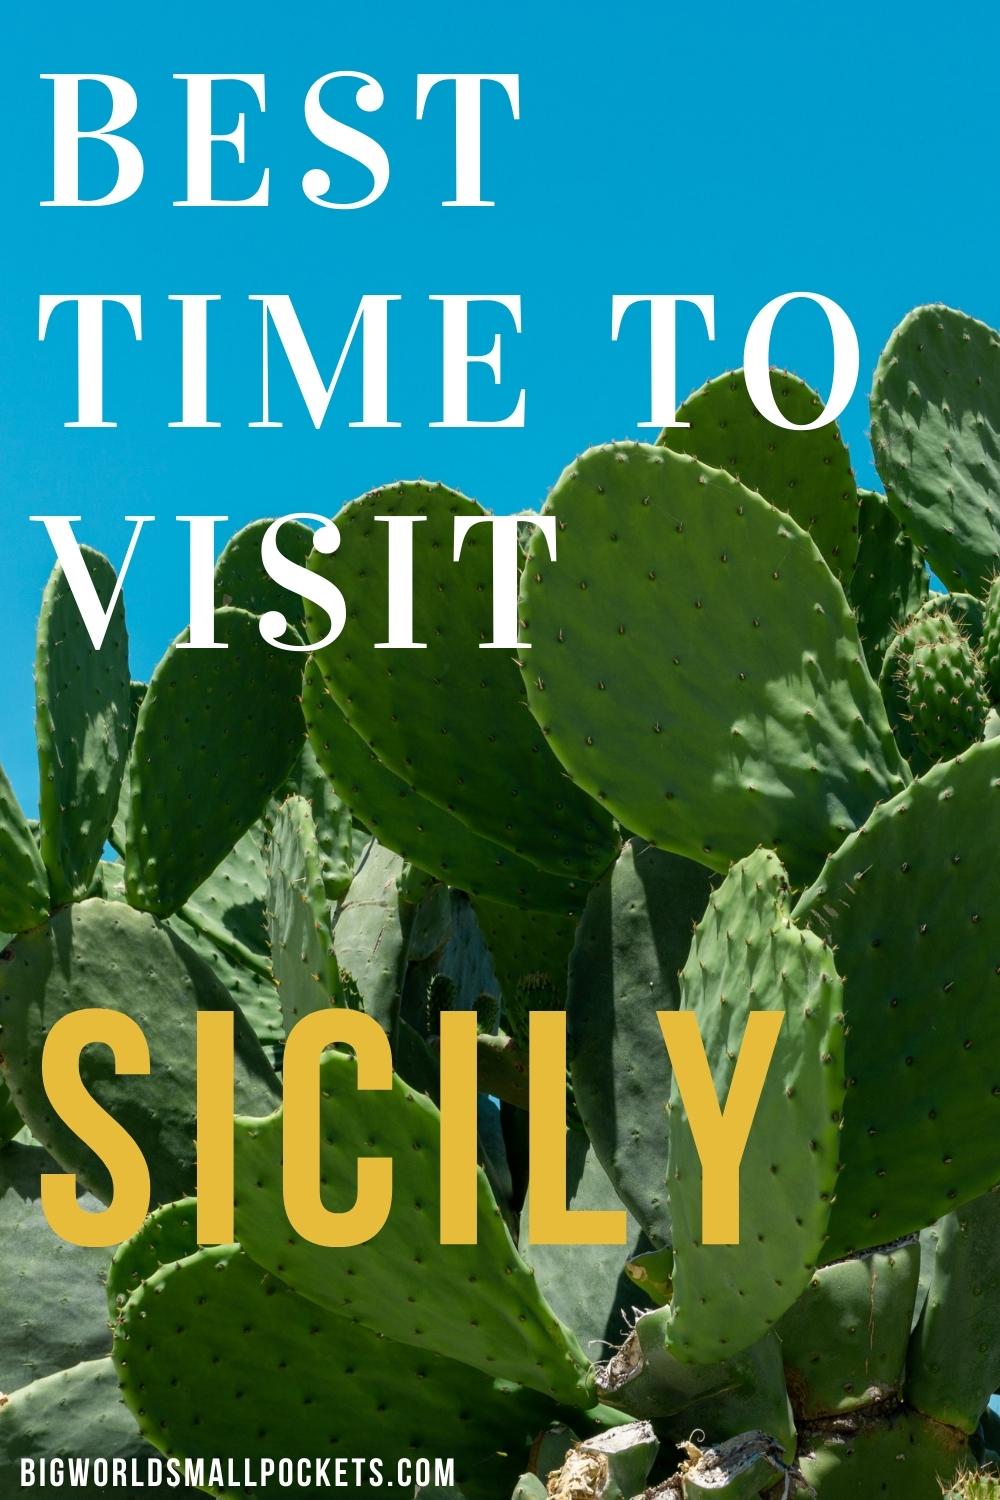 When is the Best Time to Visit Sicily, Italy